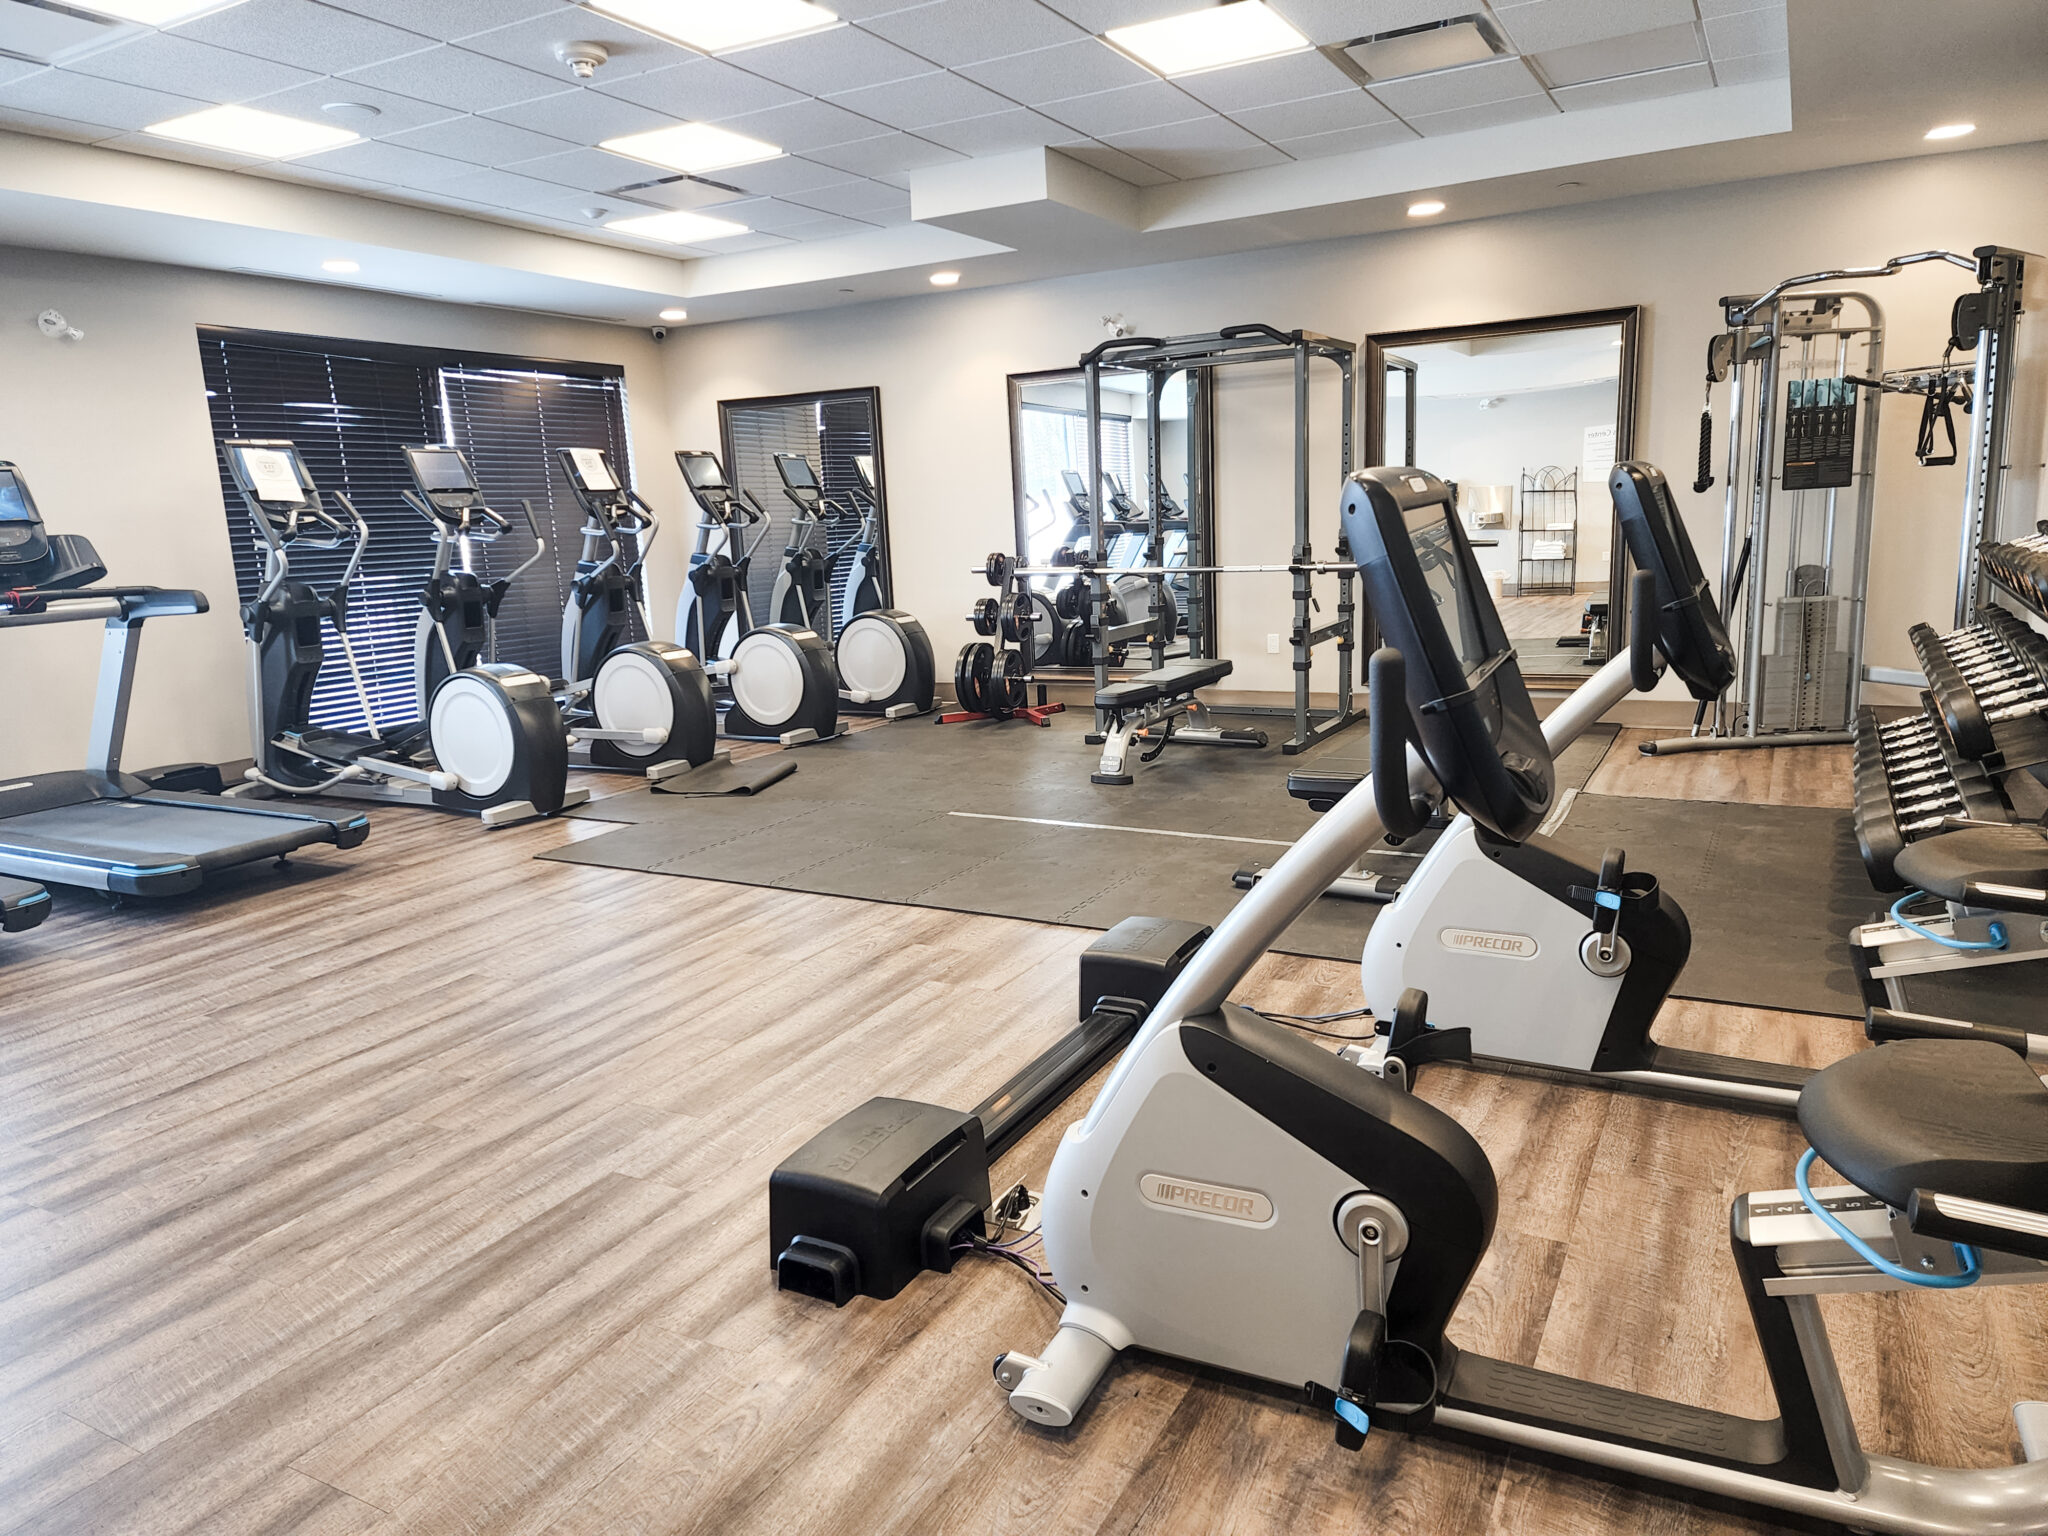 An extensive hotel gym with bikes, treadmills, ellipticals, weights, and smith machines.